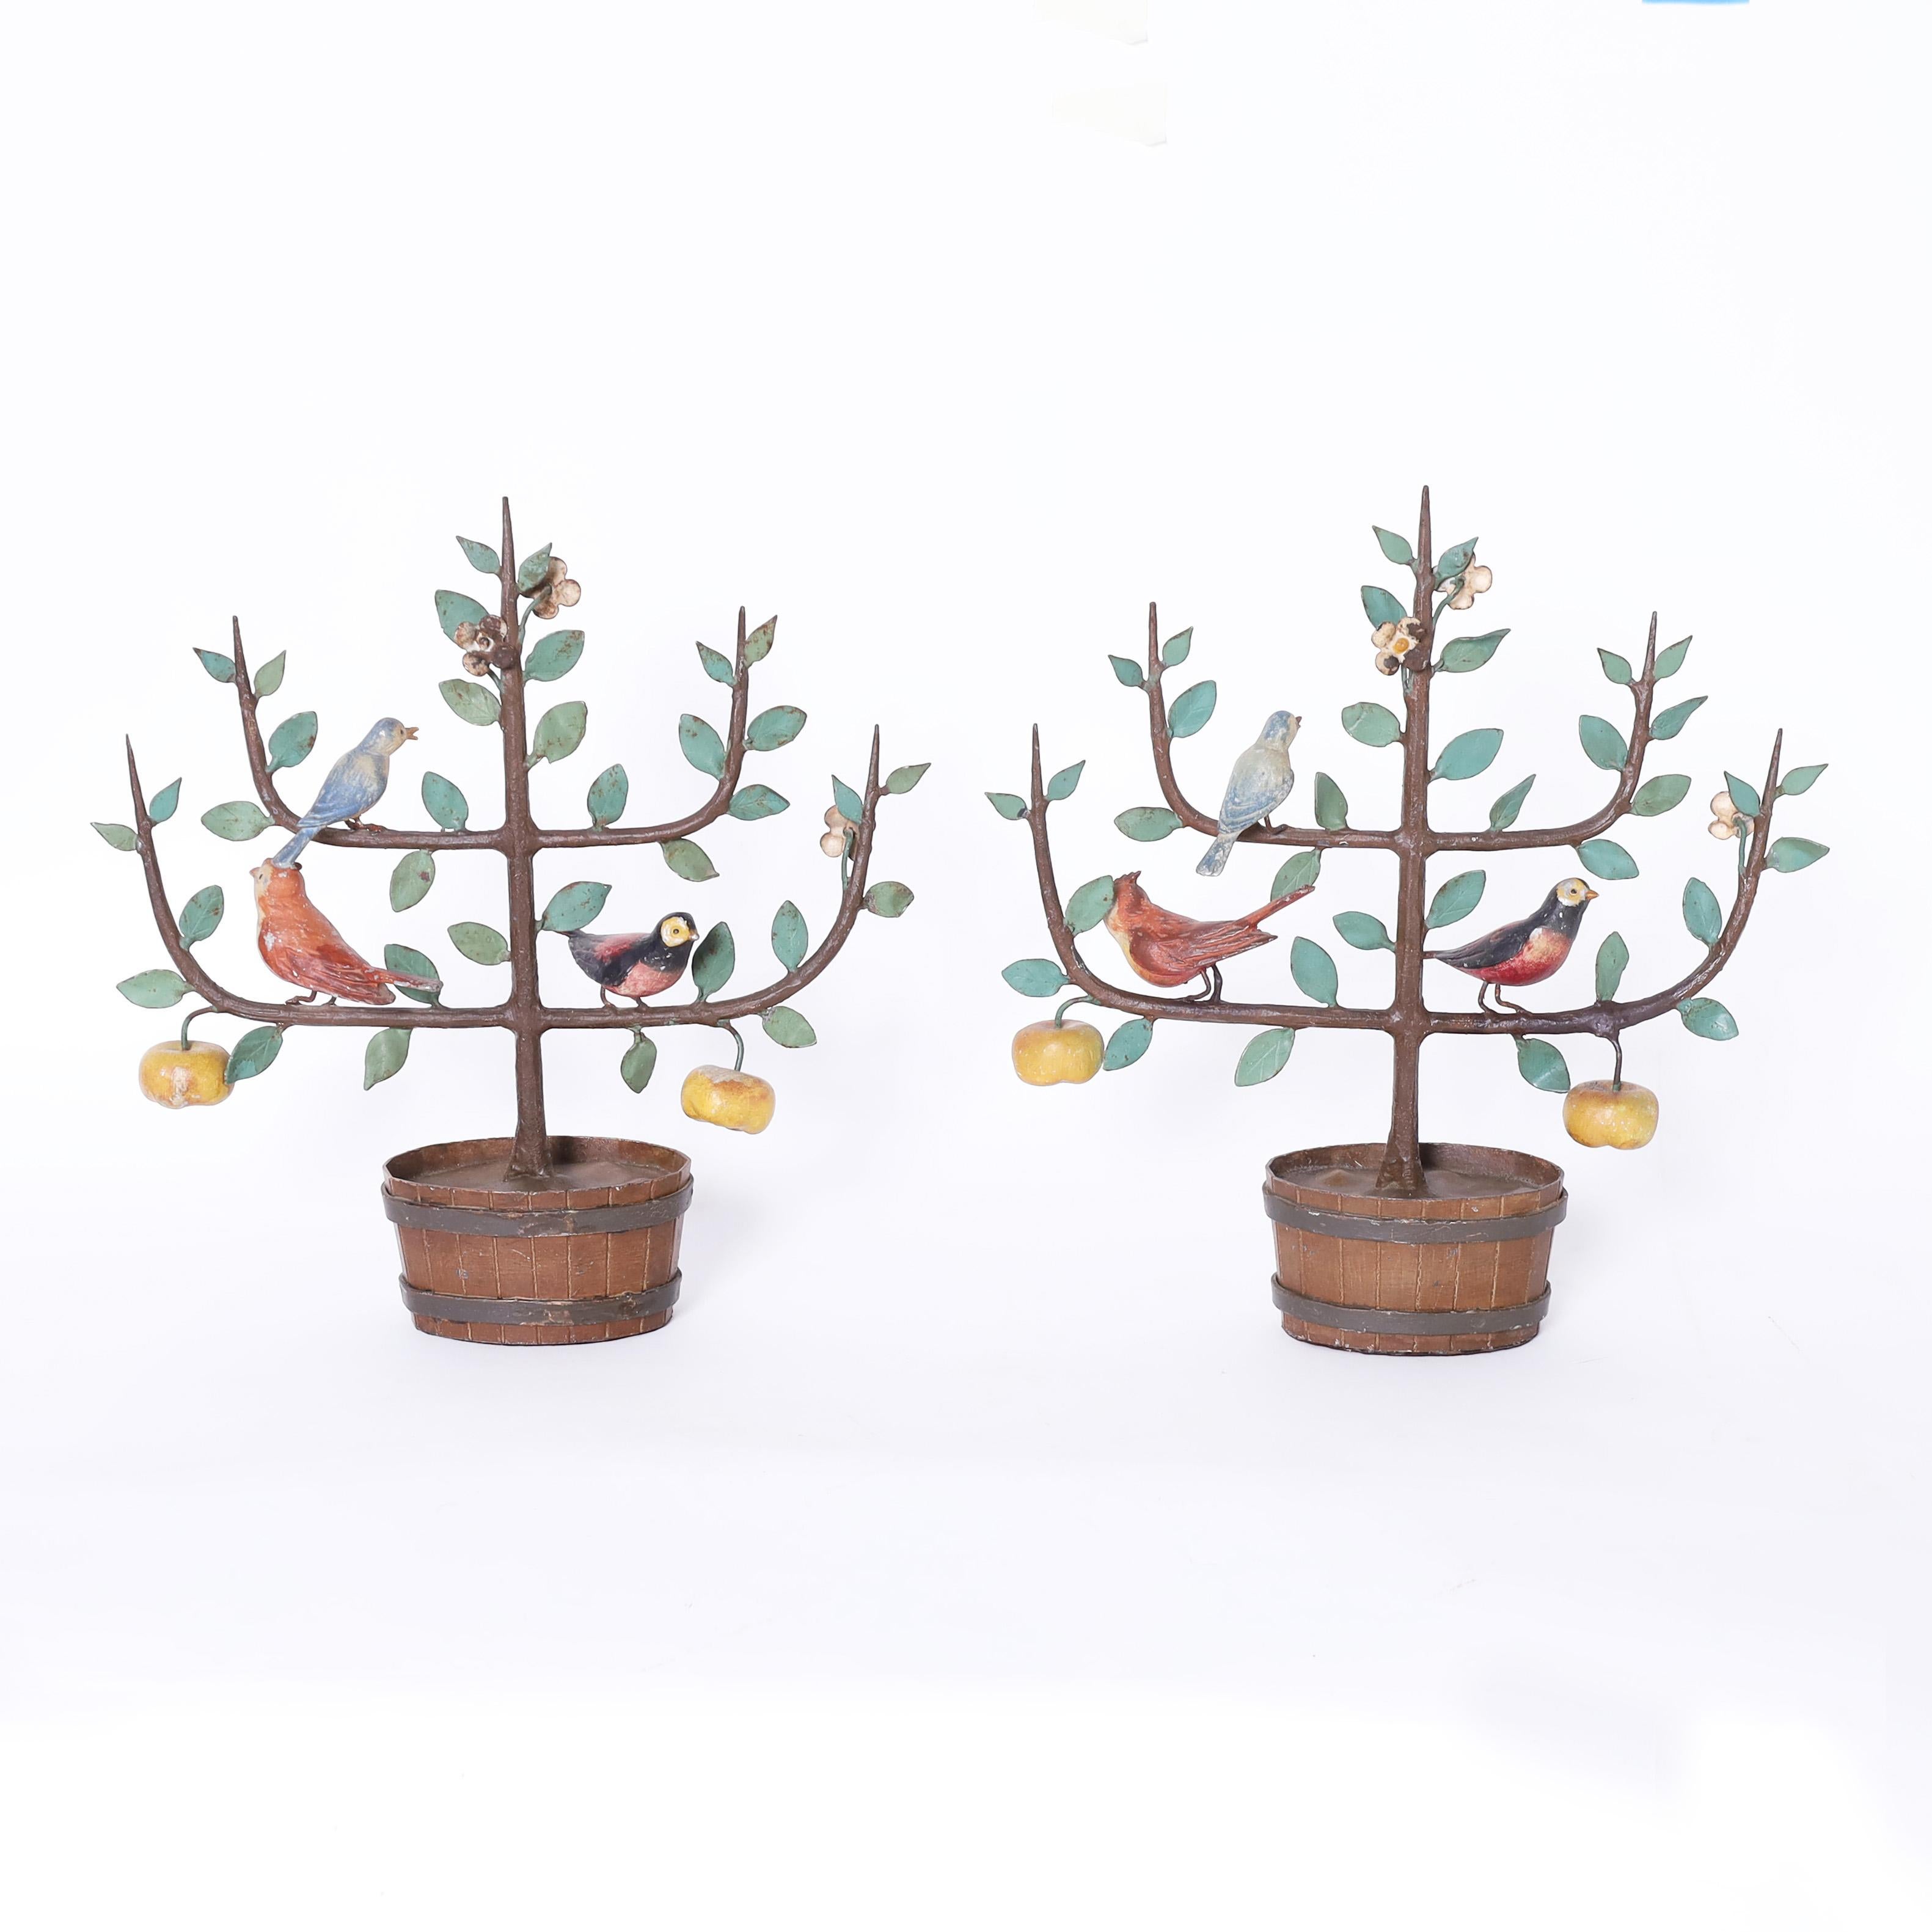 Charming pair of Italian tole plants or trees with fruit, flowers, and birds in a wood barrel planter now aged to perfection. 